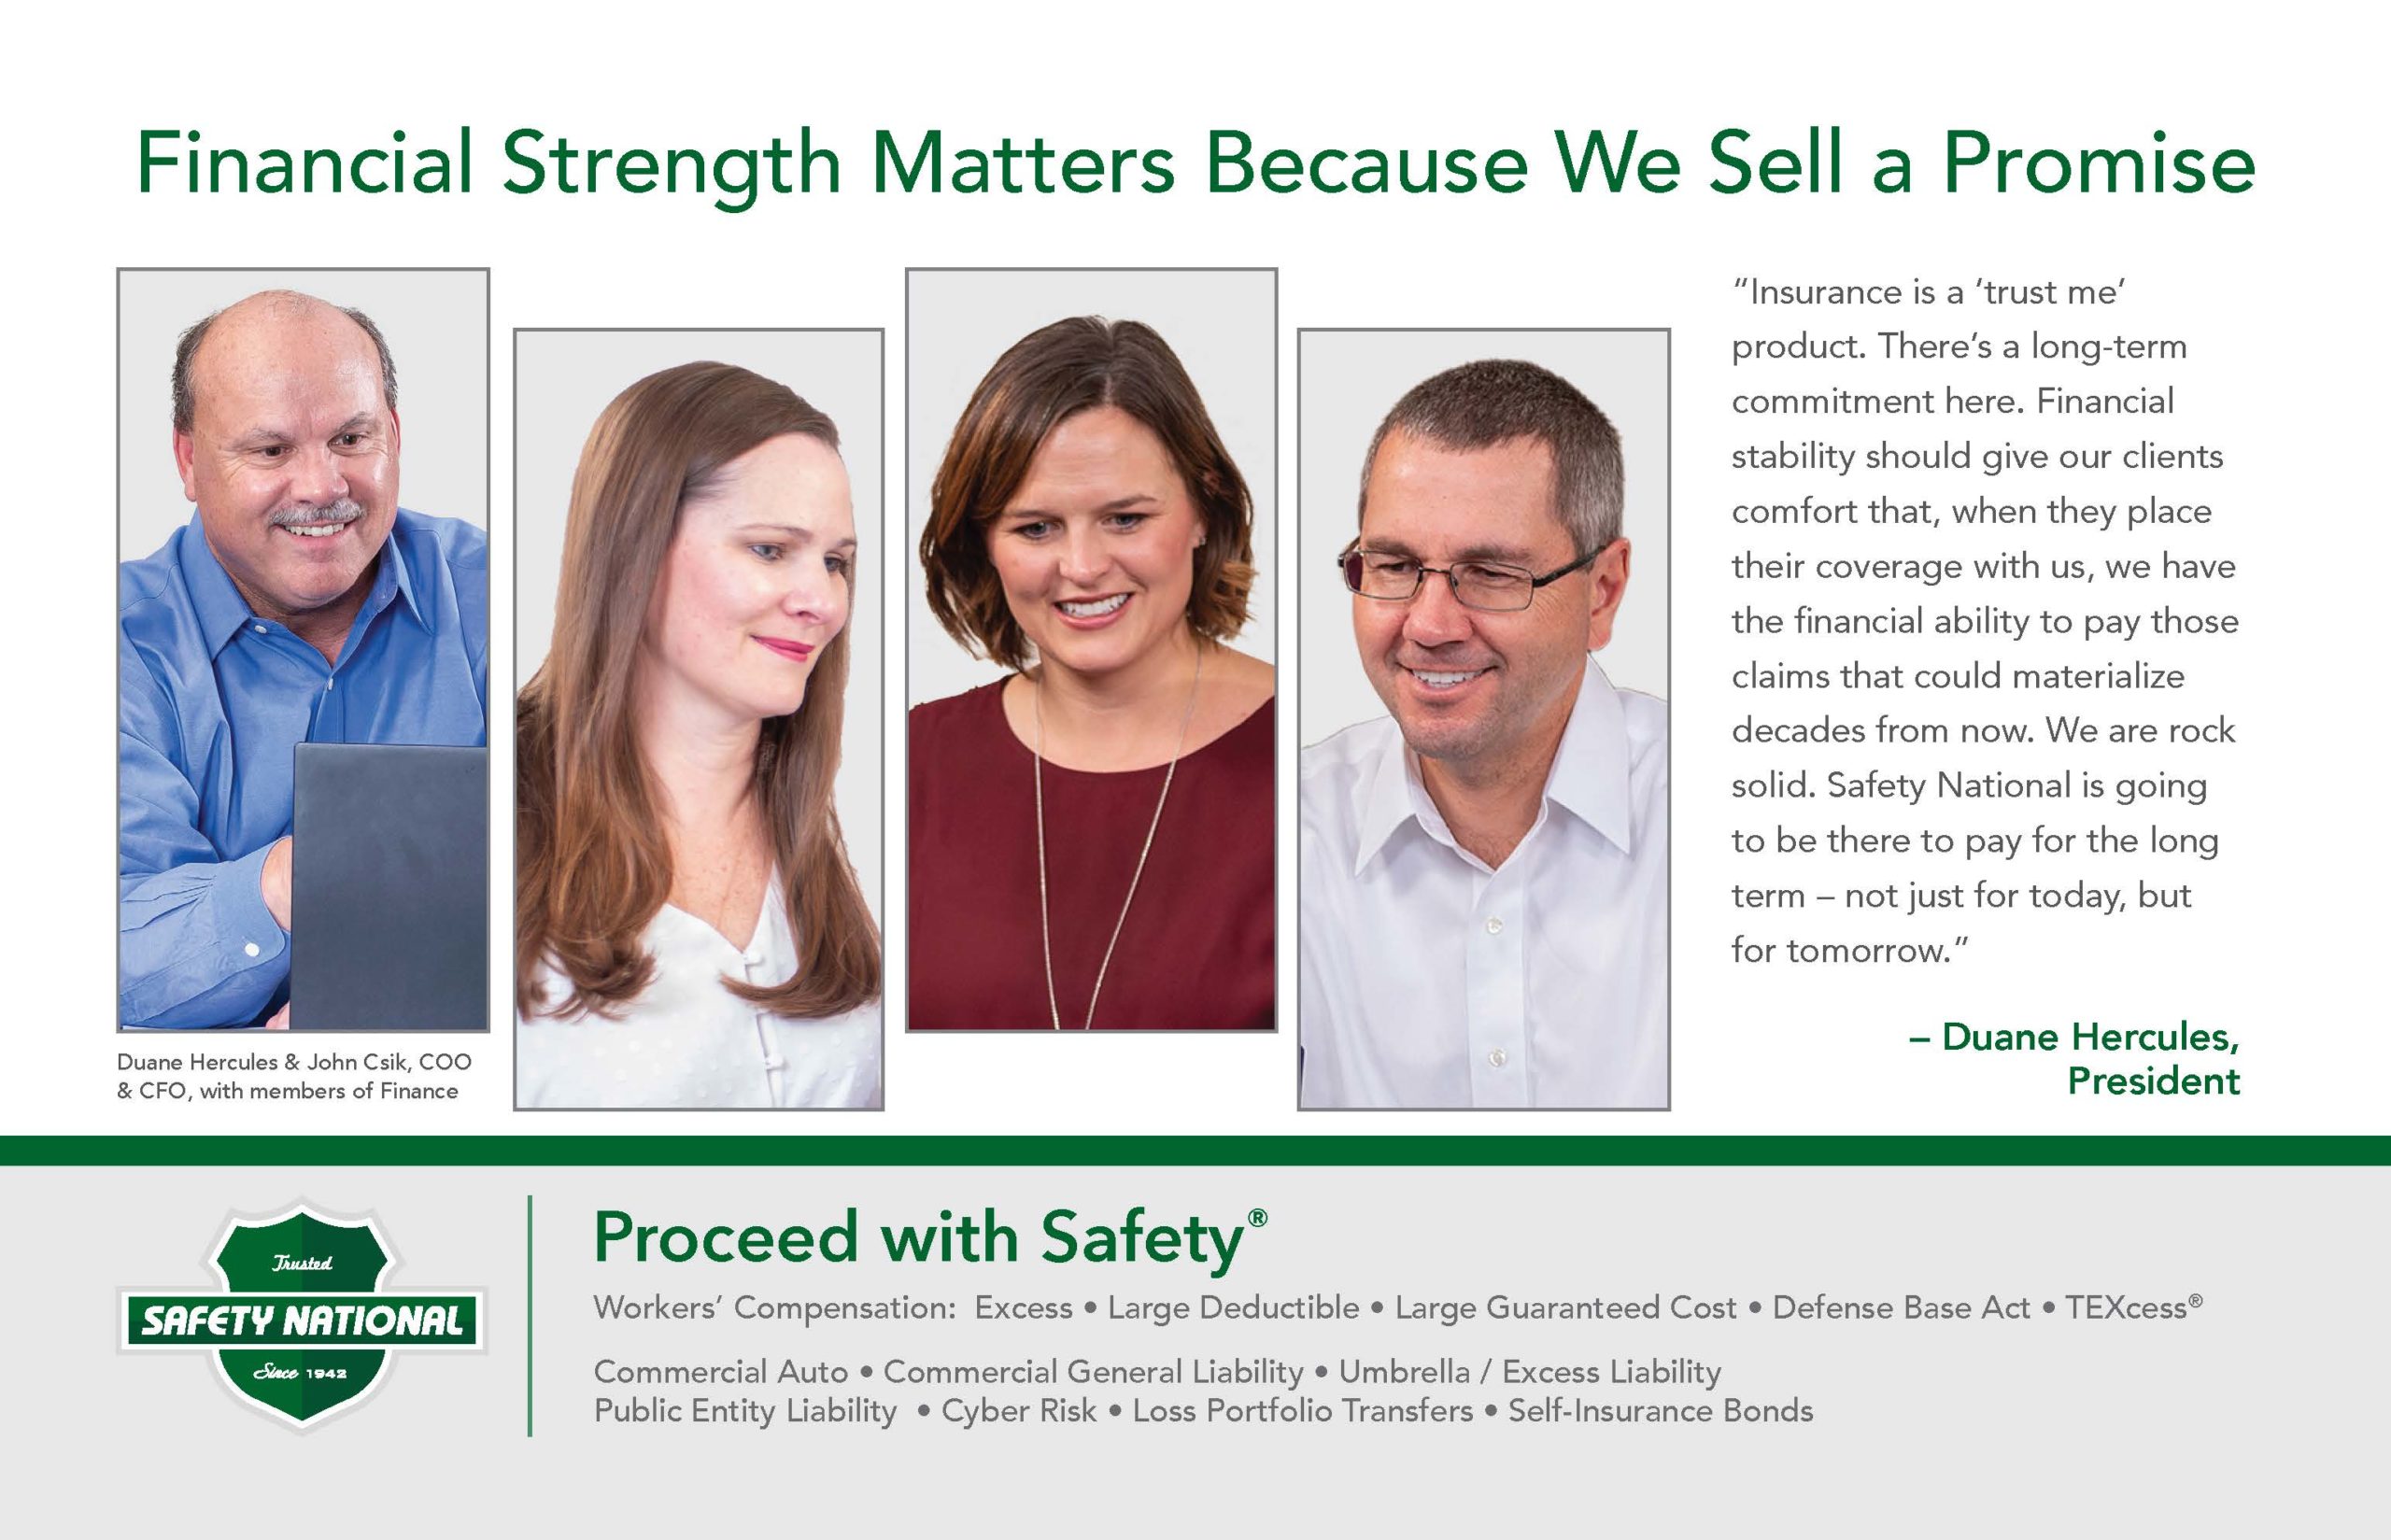 2021 Financial Strength Matters Because We Sell a Promise